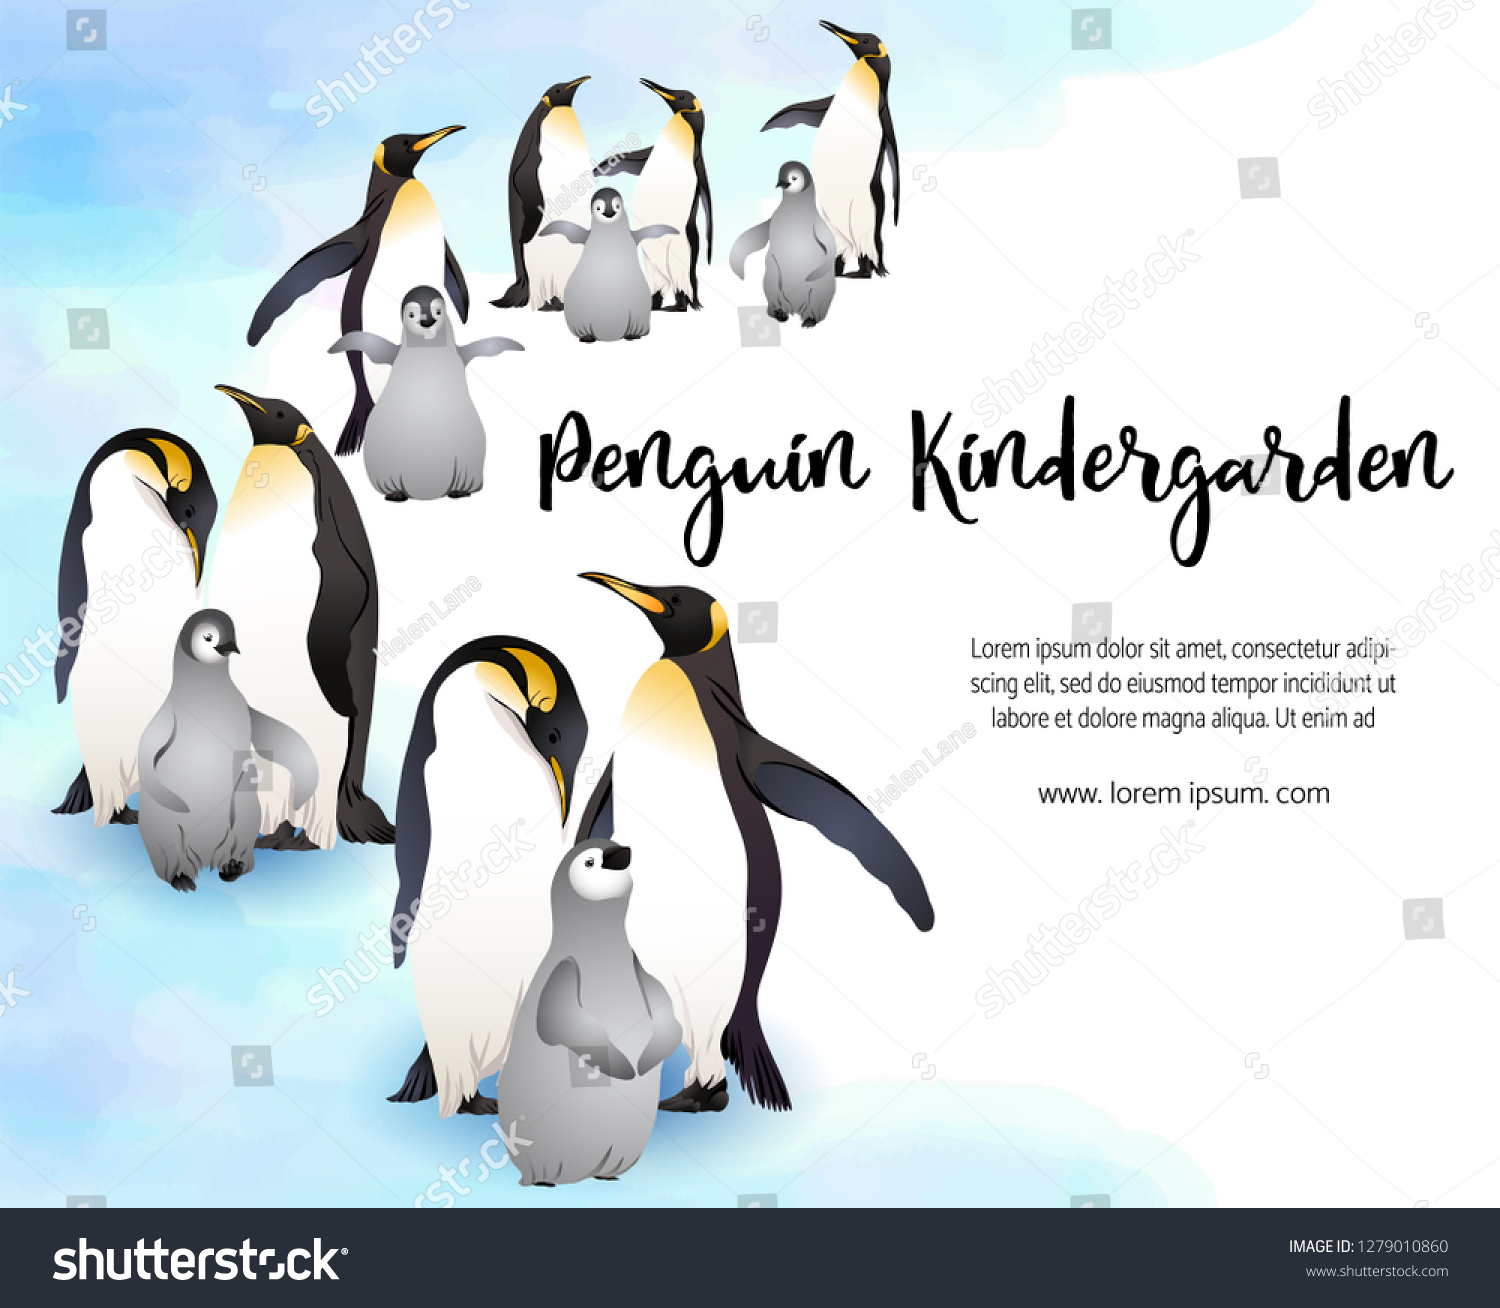 Emperor Penguin Individuality Motivational Poster 24x36 ANIMAL LOVERS CUTE